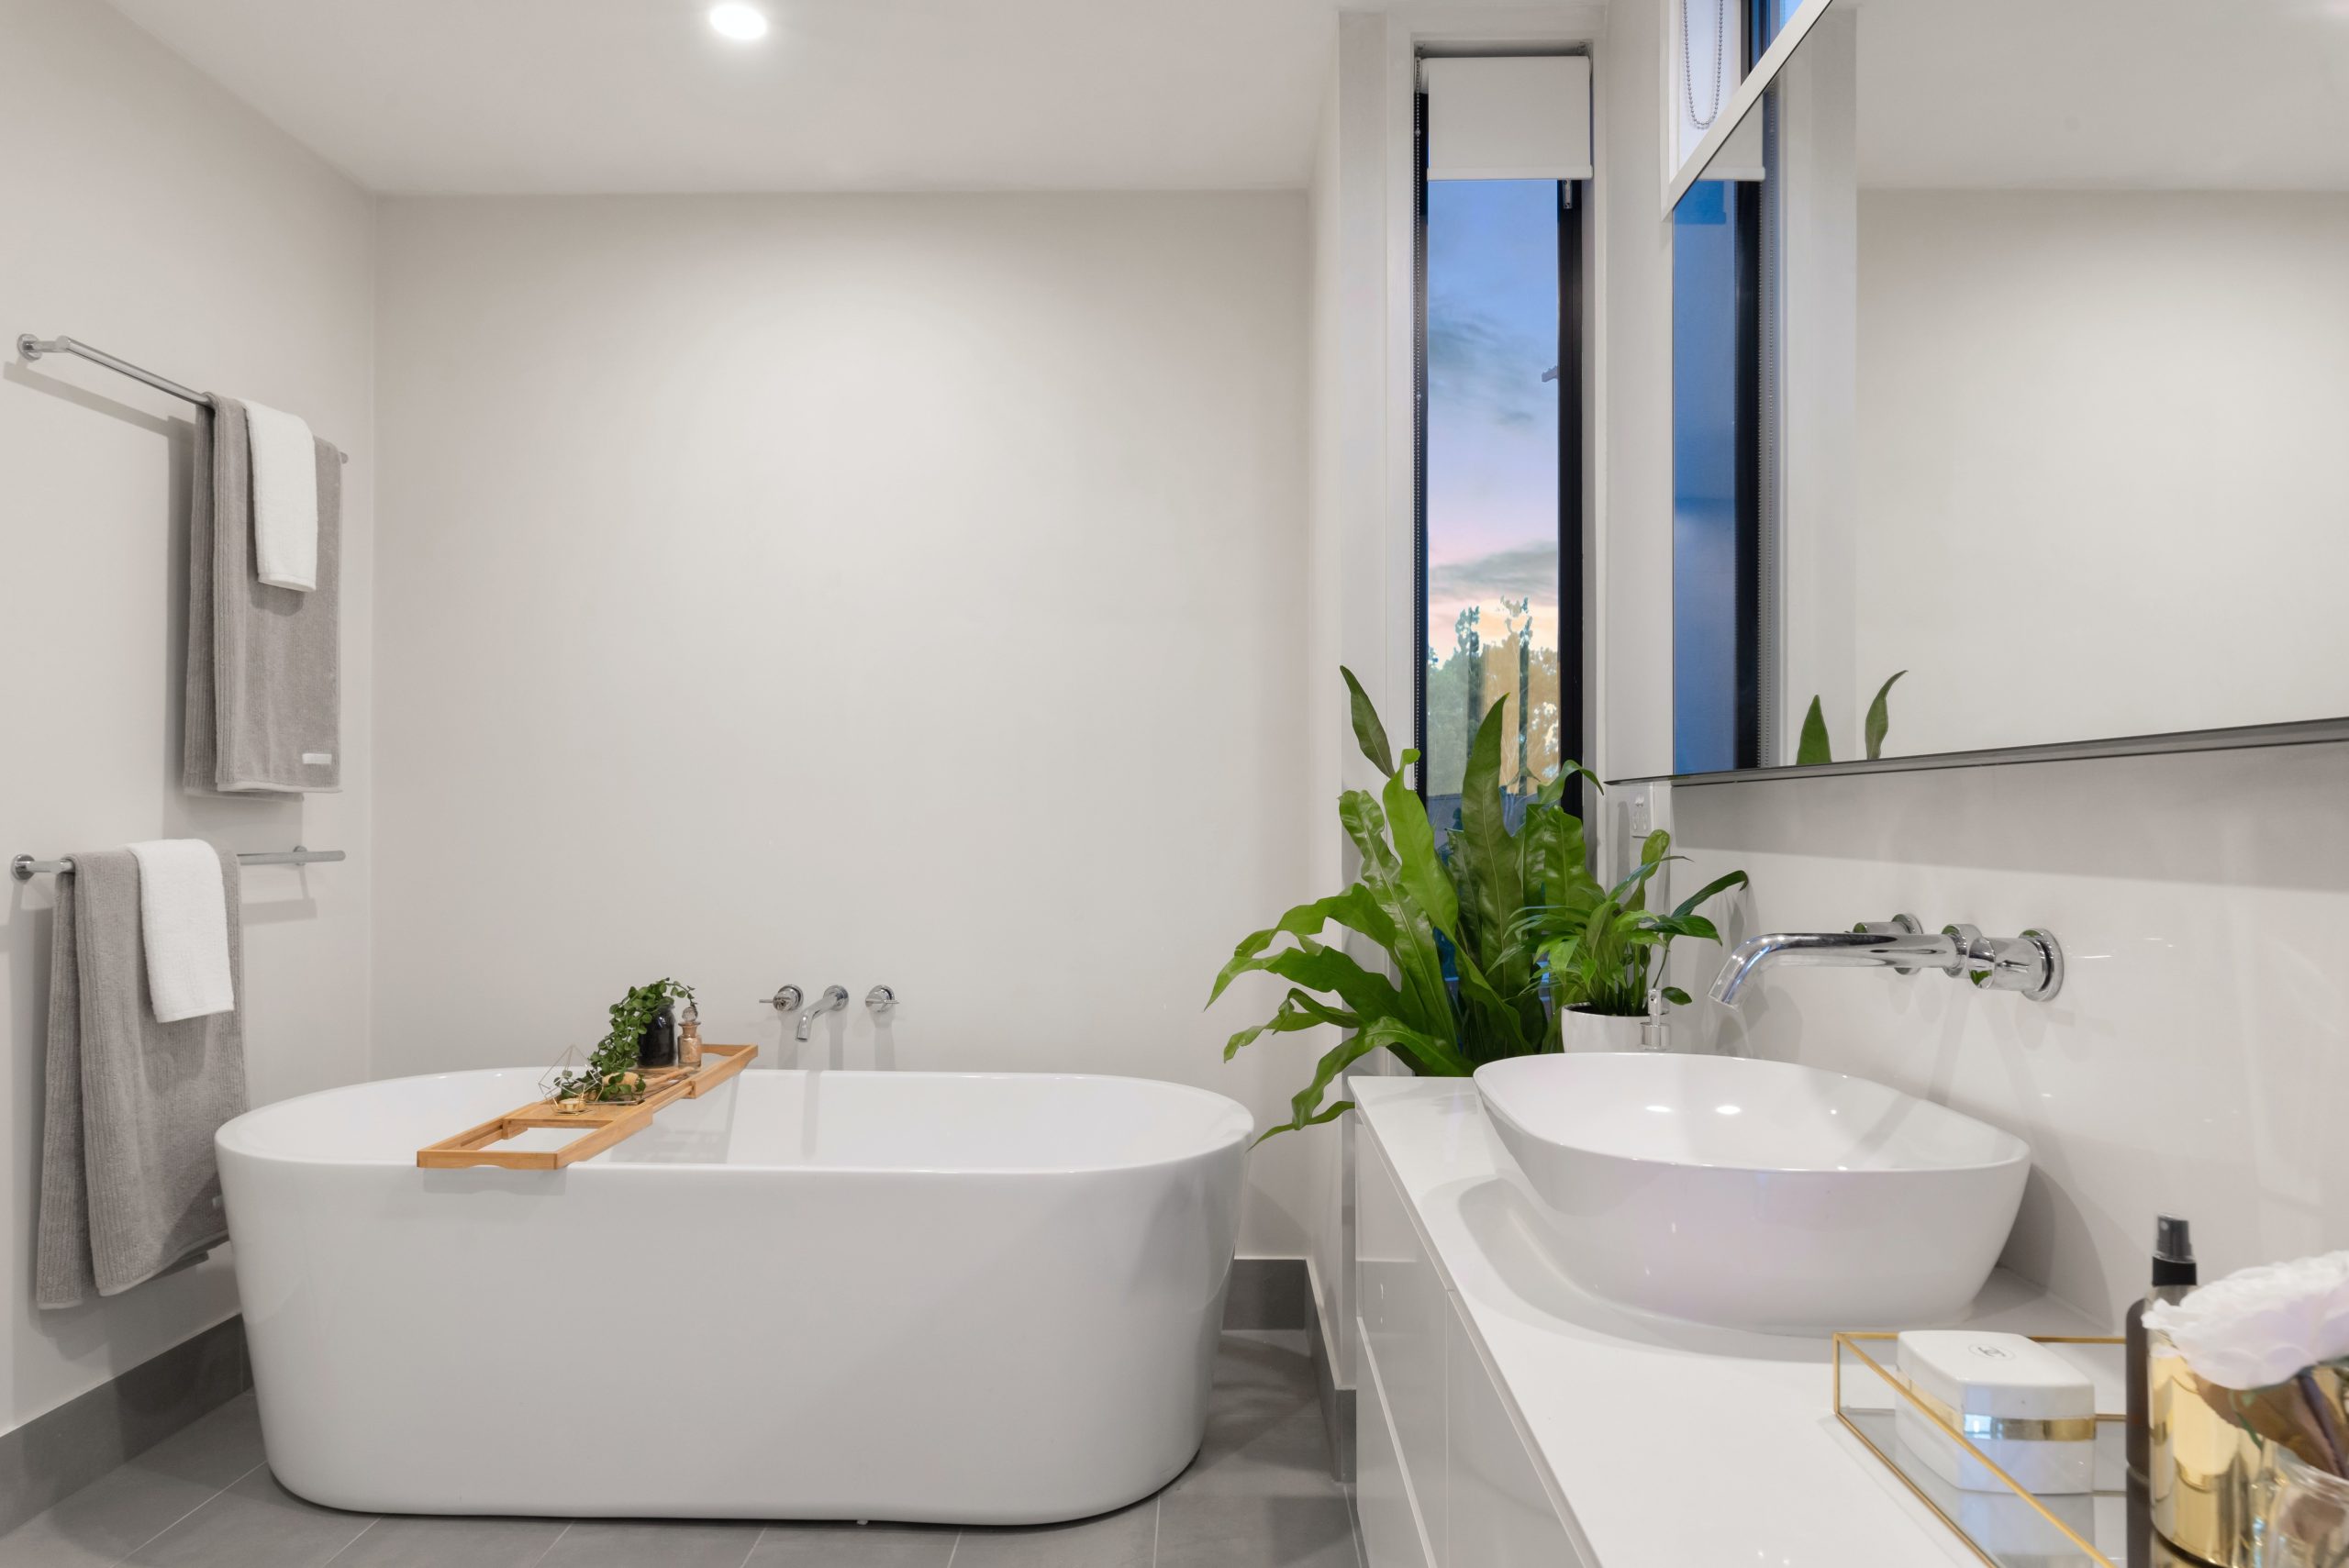 A photo of a bath with white walls and baths